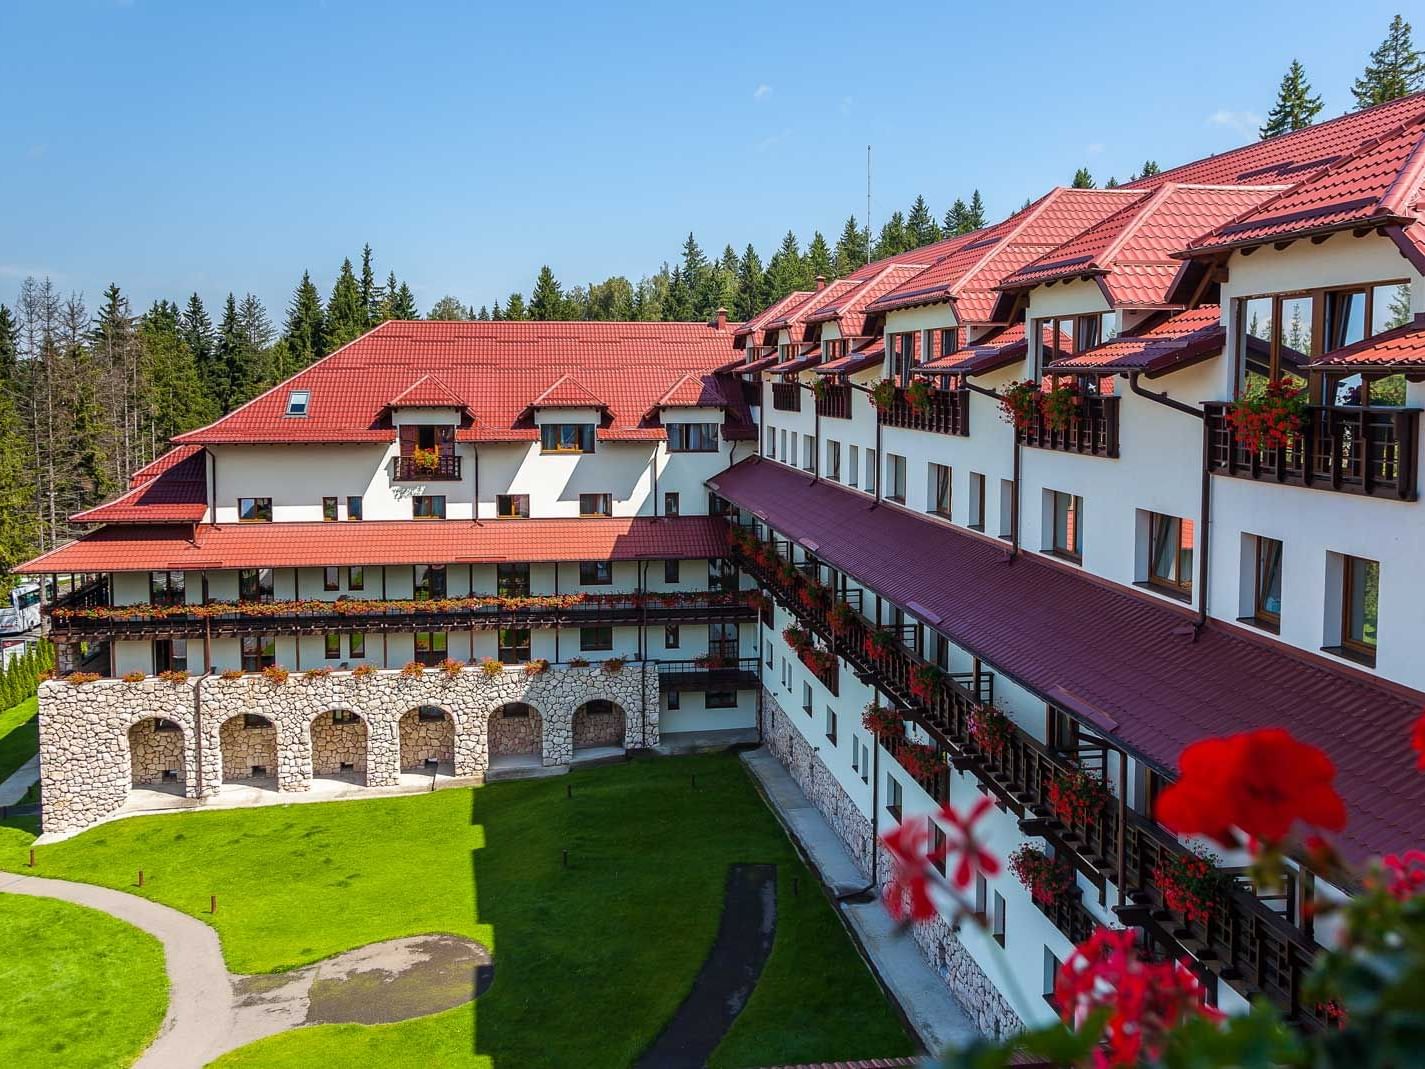 Exterior view of the Hotel at Ana Hotels Sport Poiana Brașov